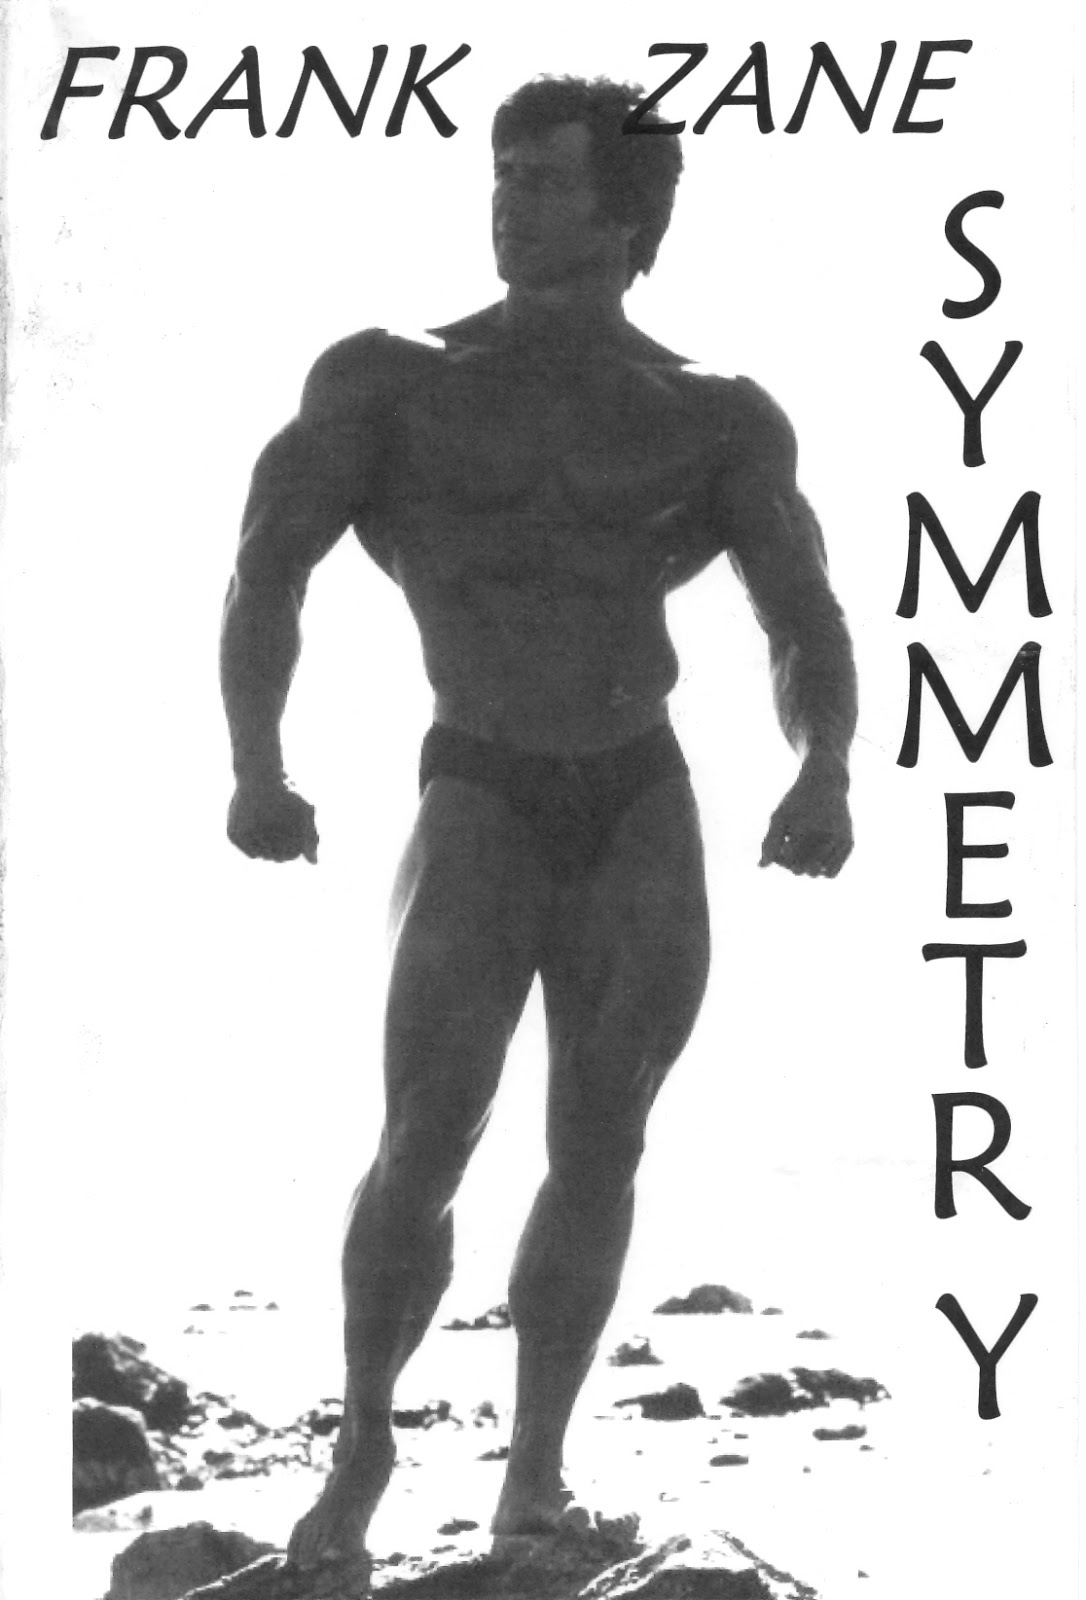 Going to Arnold Expo - Frank Zane - 3X Mr. Olympia